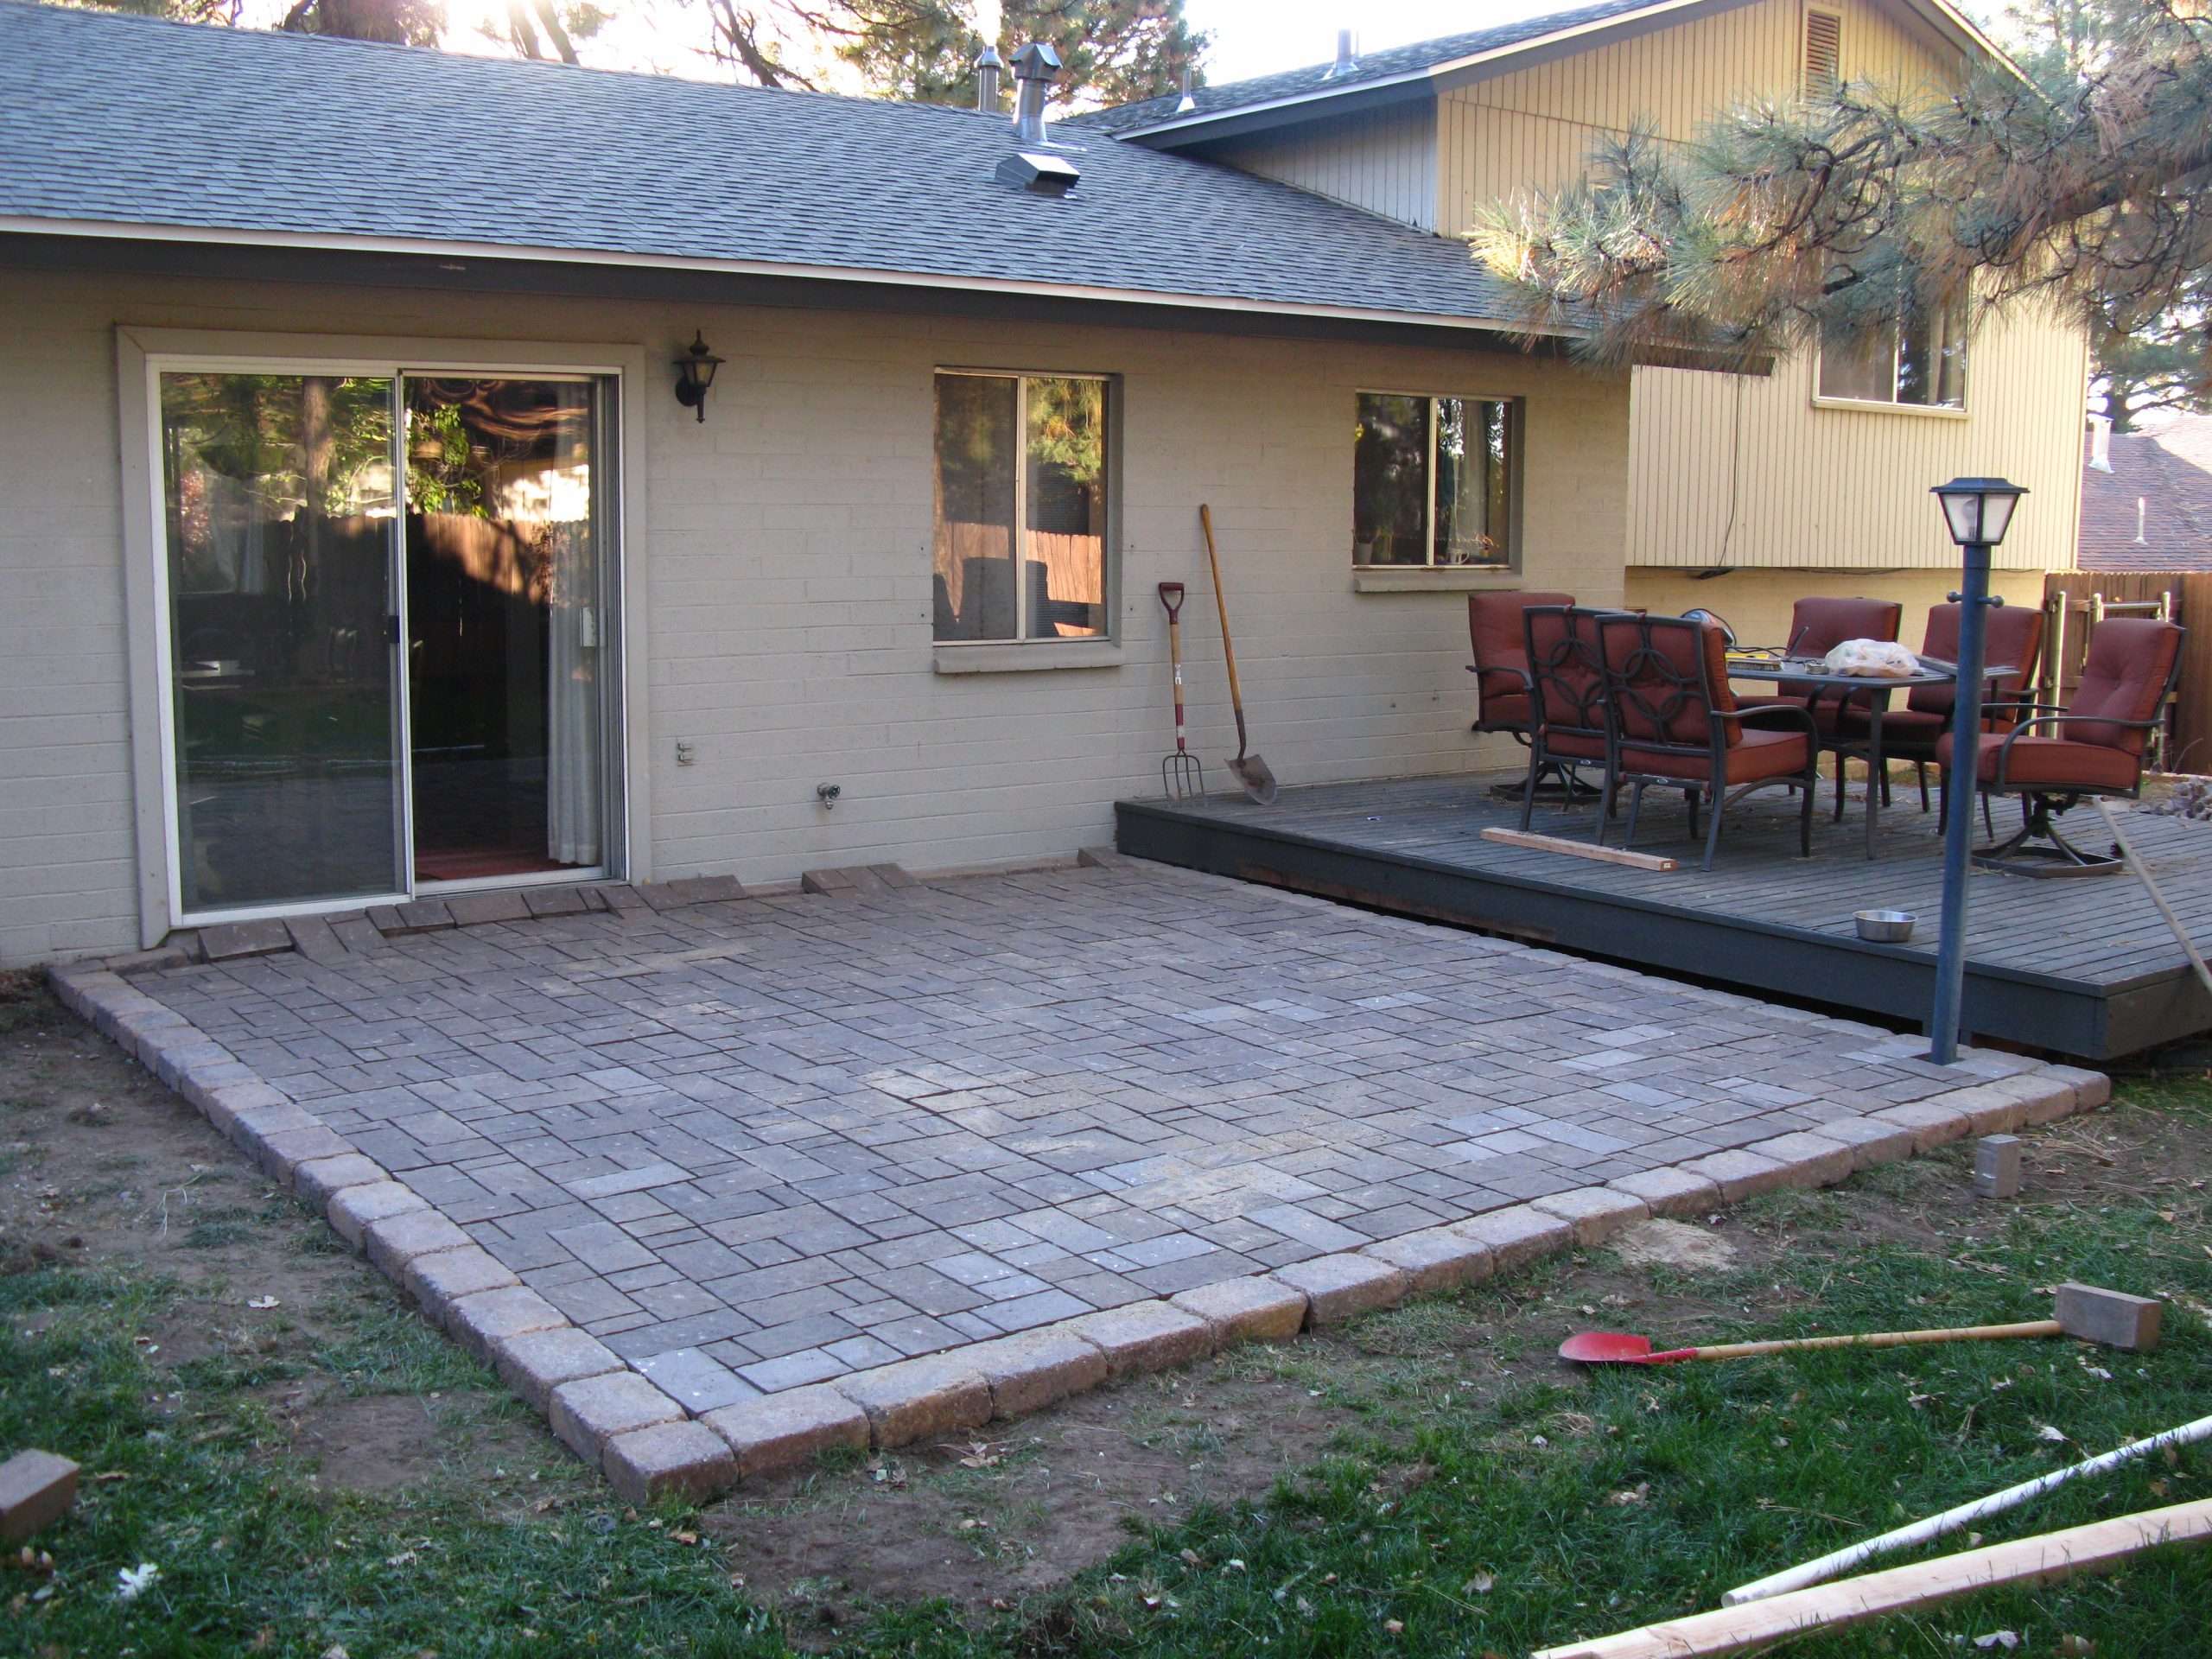 How to Build a Paver Patio on a Cement Slab: Part 3 â Sand ...